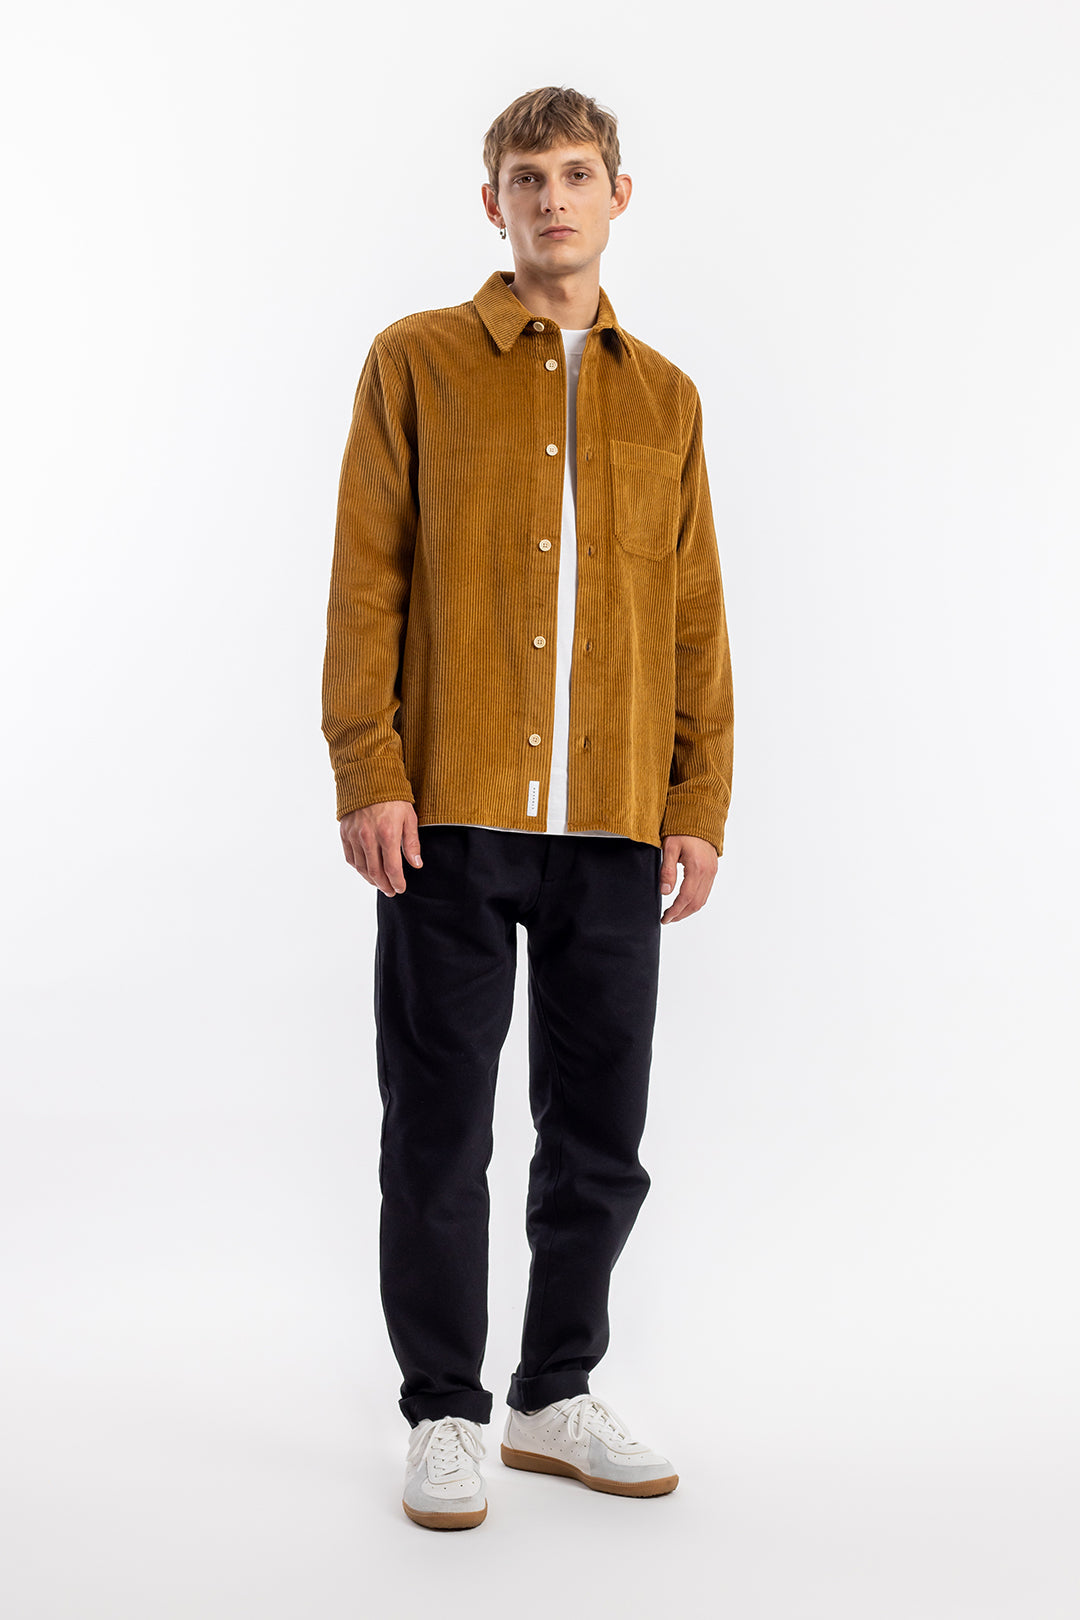 Toffee-colored corduroy shirt made from 100% organic cotton from Rotholz